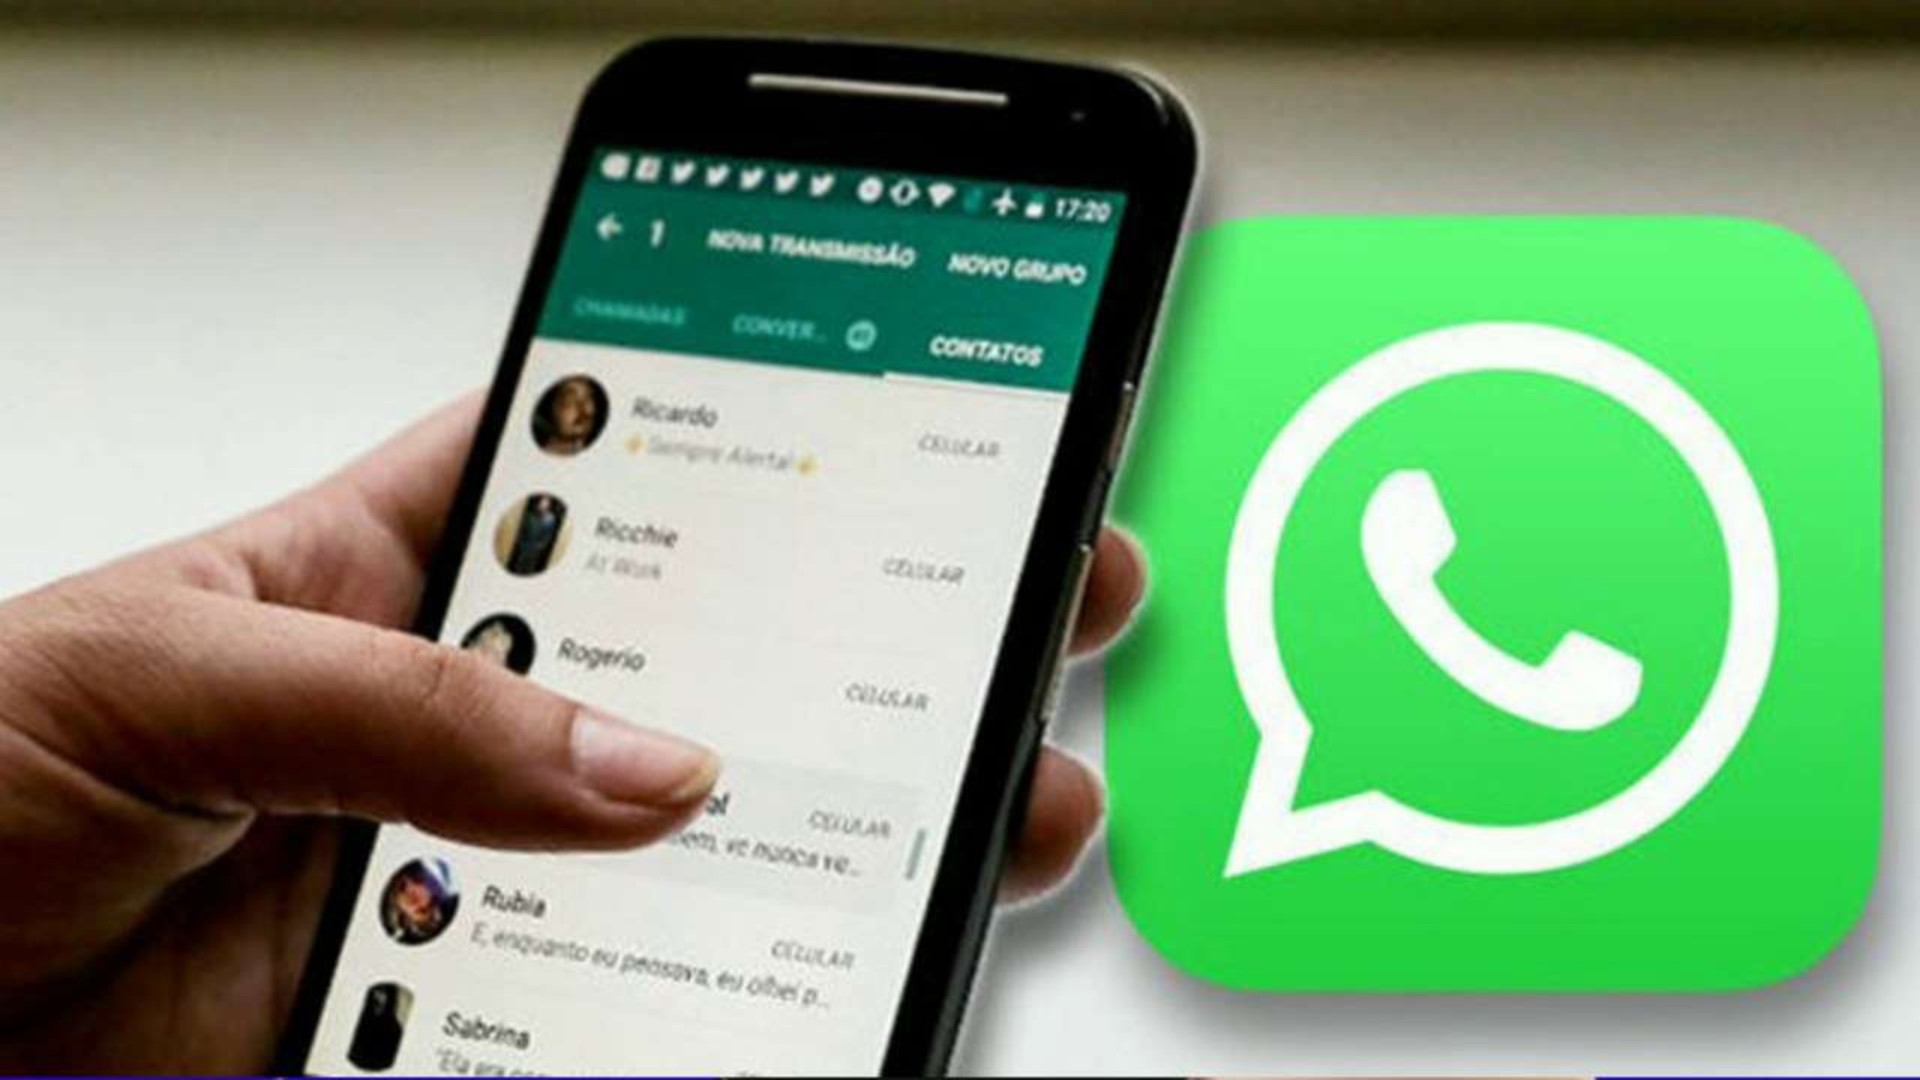 Update Alert, Whatsapp Chats, Images Will Auto-Delete In 90 Days!